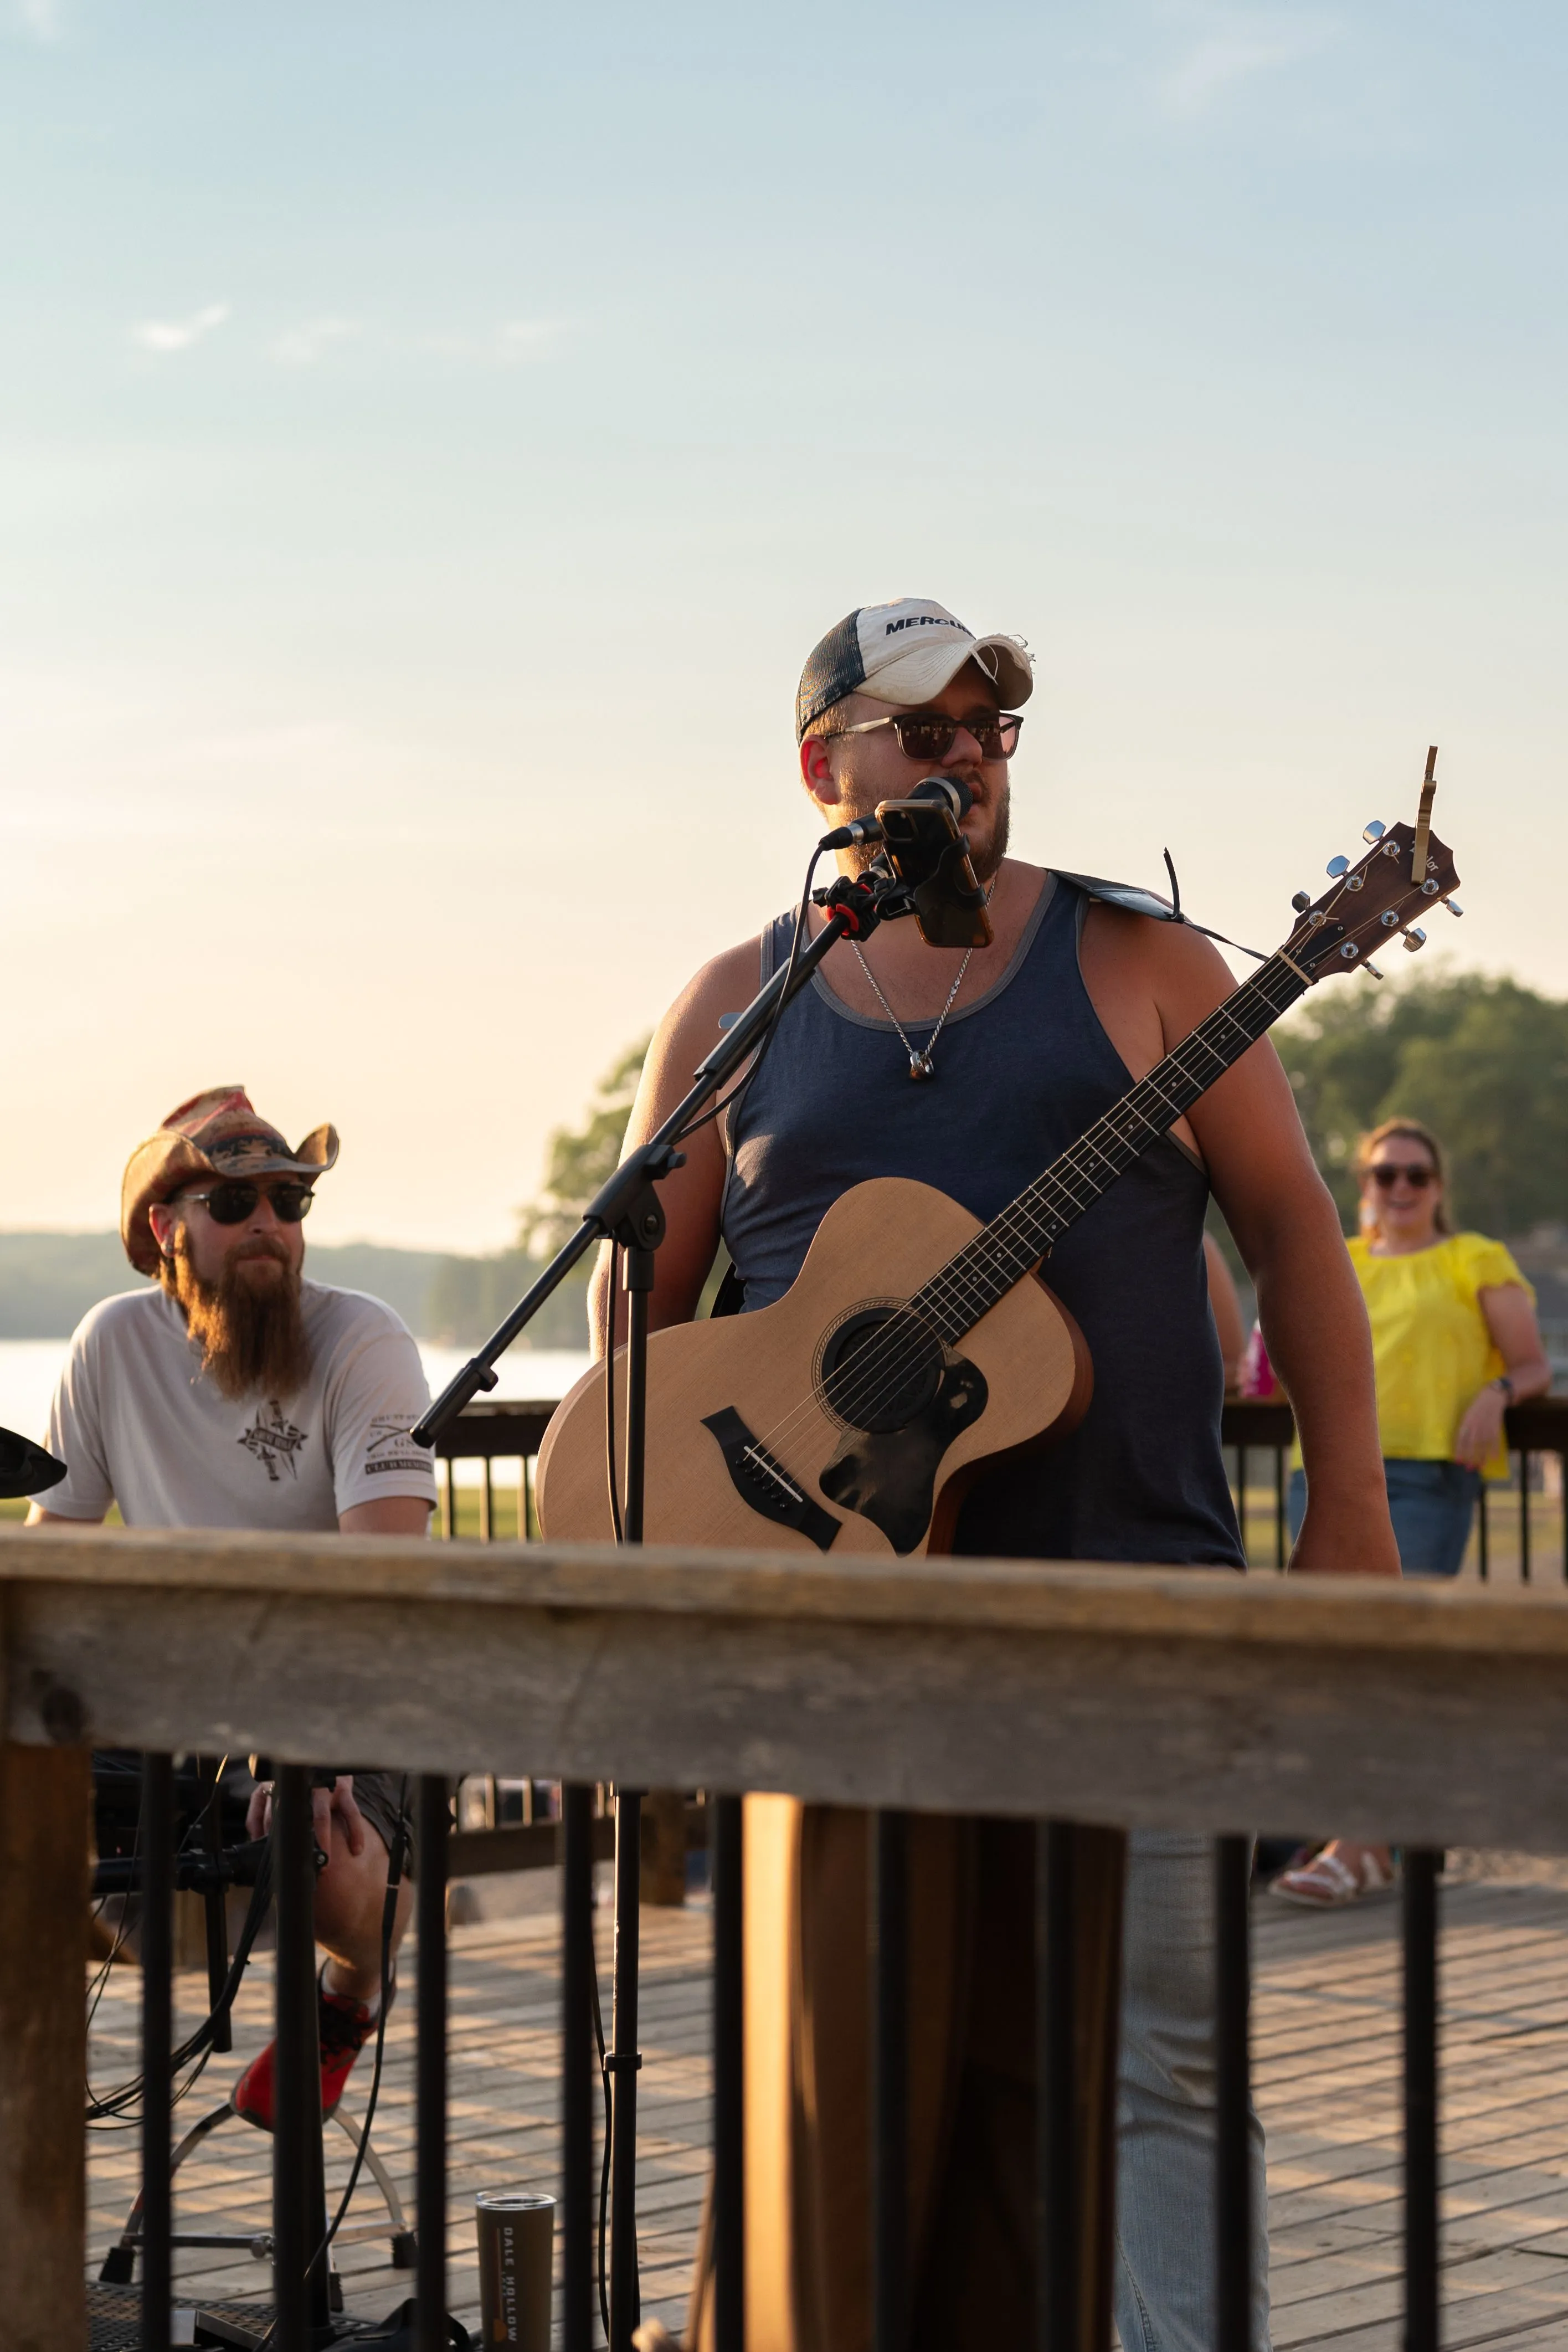 Musician playing guitar outdoors on a deck with another person in the background and a waterfront view during sunset.